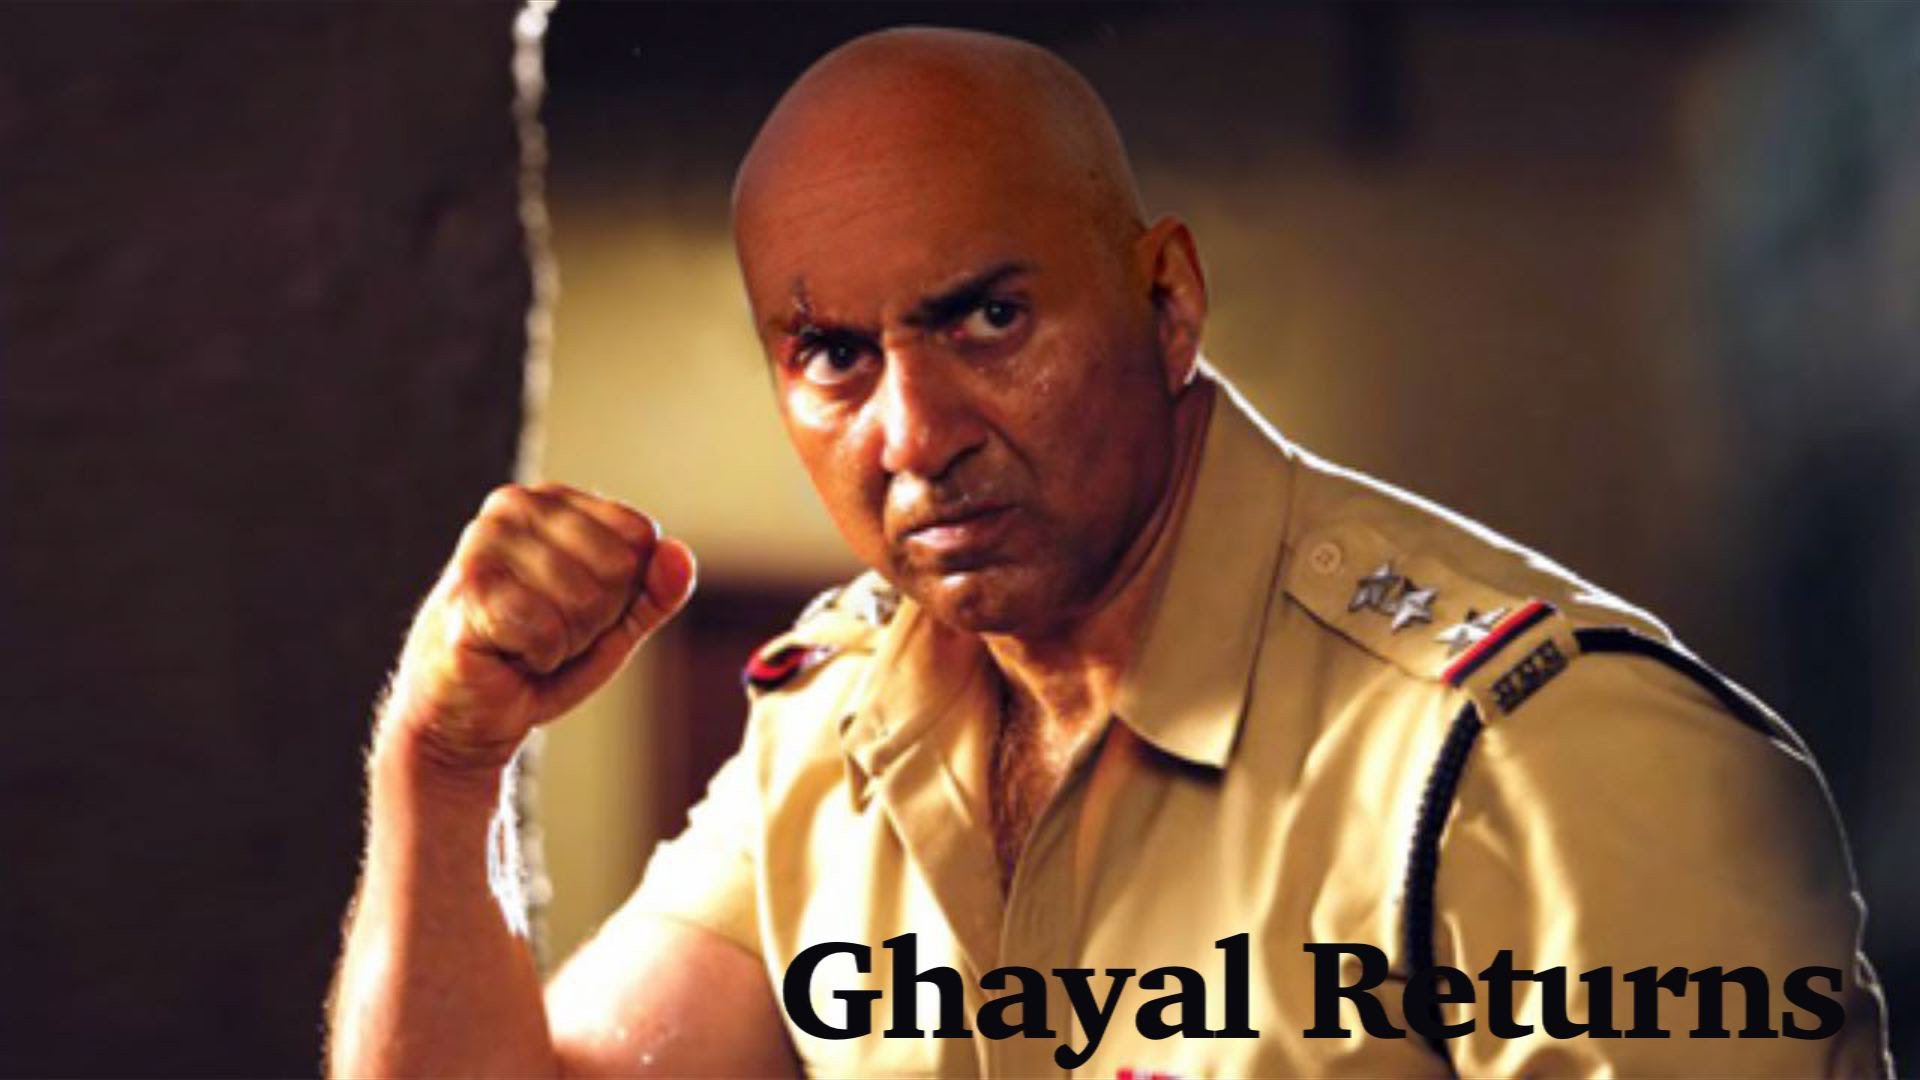 Ghayal Returans Movie Free Awesome Image For Mobile